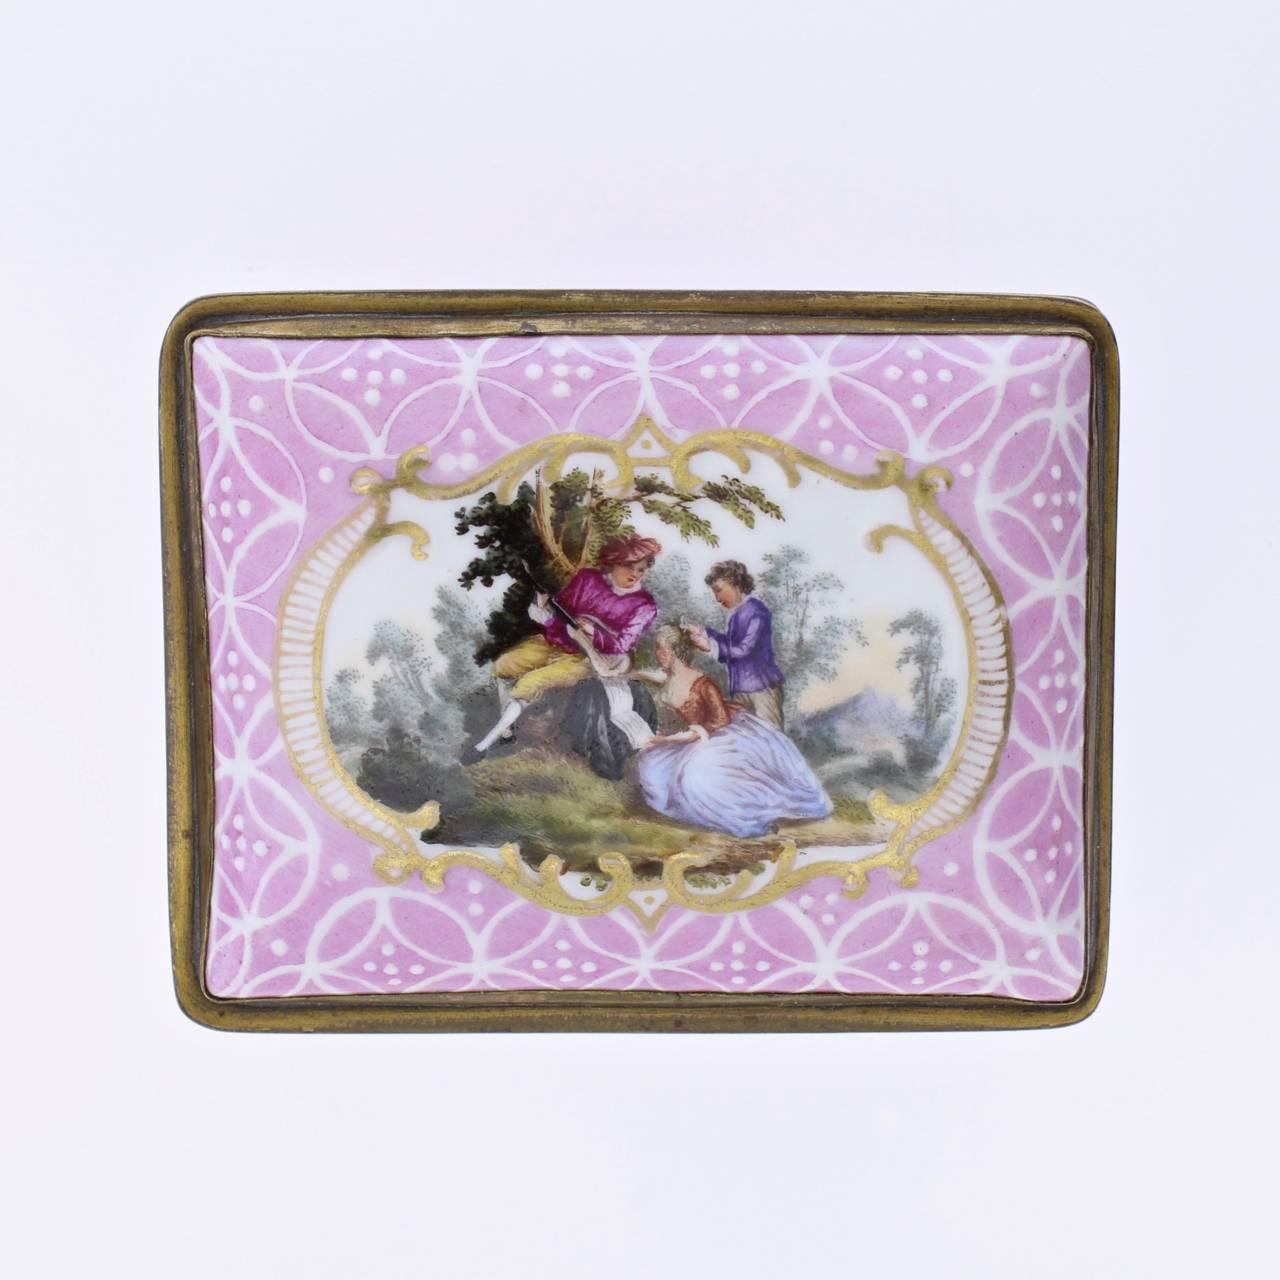 A fine antique English South Staffordshire or Battersea enamel table snuff box. 

With a pink ground and white enamel latticework decoration throughout. Each side has a cartouche with classical lover's scenes. The interior of the lid has a